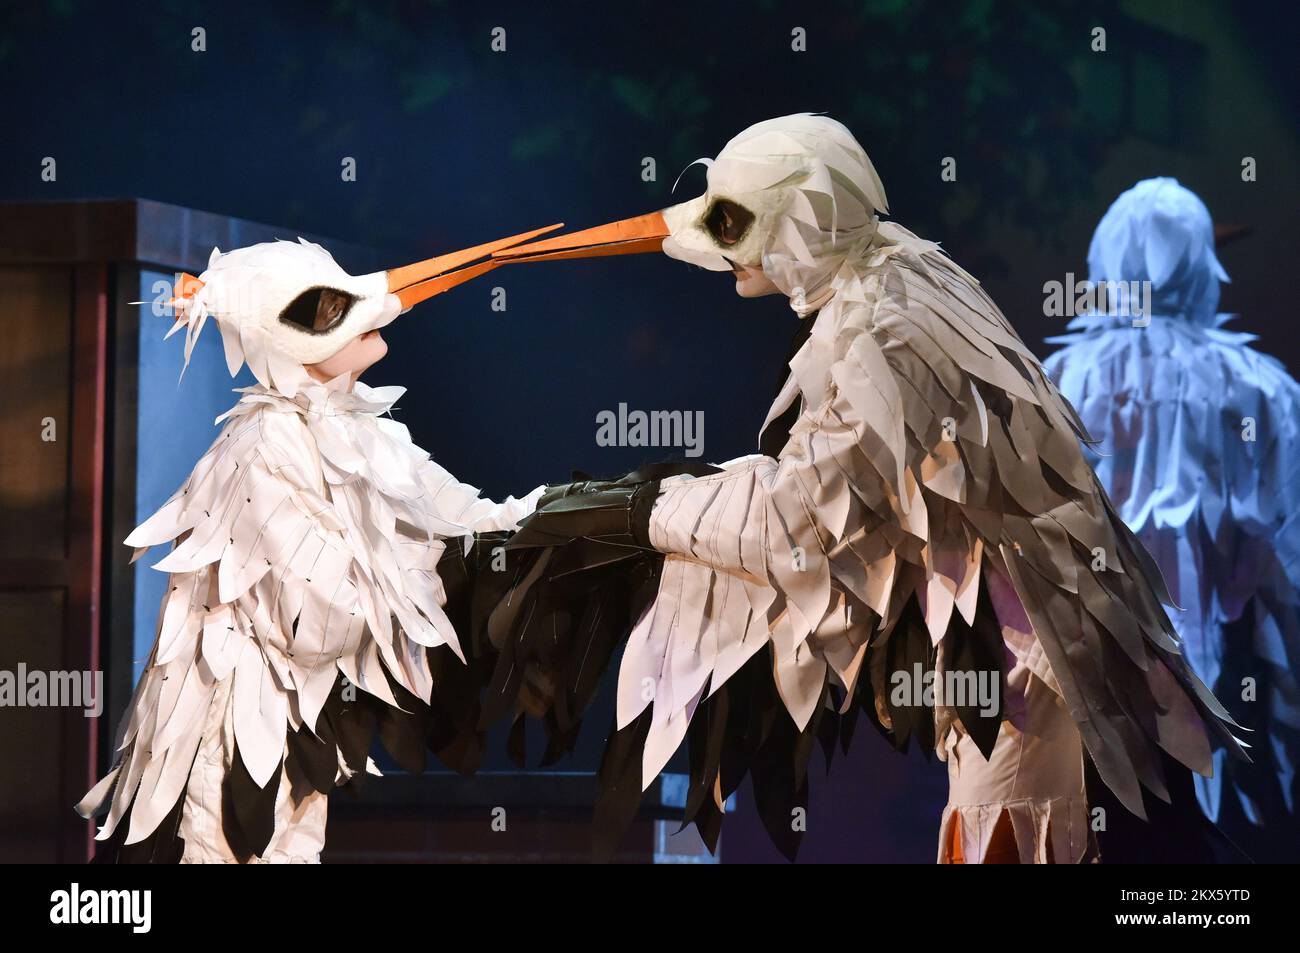 25.04.2018., Zagreb, Croatia - The remarkable love story of two long-legged birds from eastern Croatia, which has gone on for the last 16 years, has now been turned into a theatre play. â€˜Malena & Klepetan â€“ Love at first flapâ€™, written by Mirjana Piculjan Striga and directed by Zelimir Mesaric, at Zar Ptica theatre. The love story of storks Klepetan and Malena has captured the hearts of many for 16 years now. The two storks made their nest on a chimney in Brodski Varos in eastern Croatia more than two decades ago. Photo: Davor Visnjic/PIXSELL Stock Photo